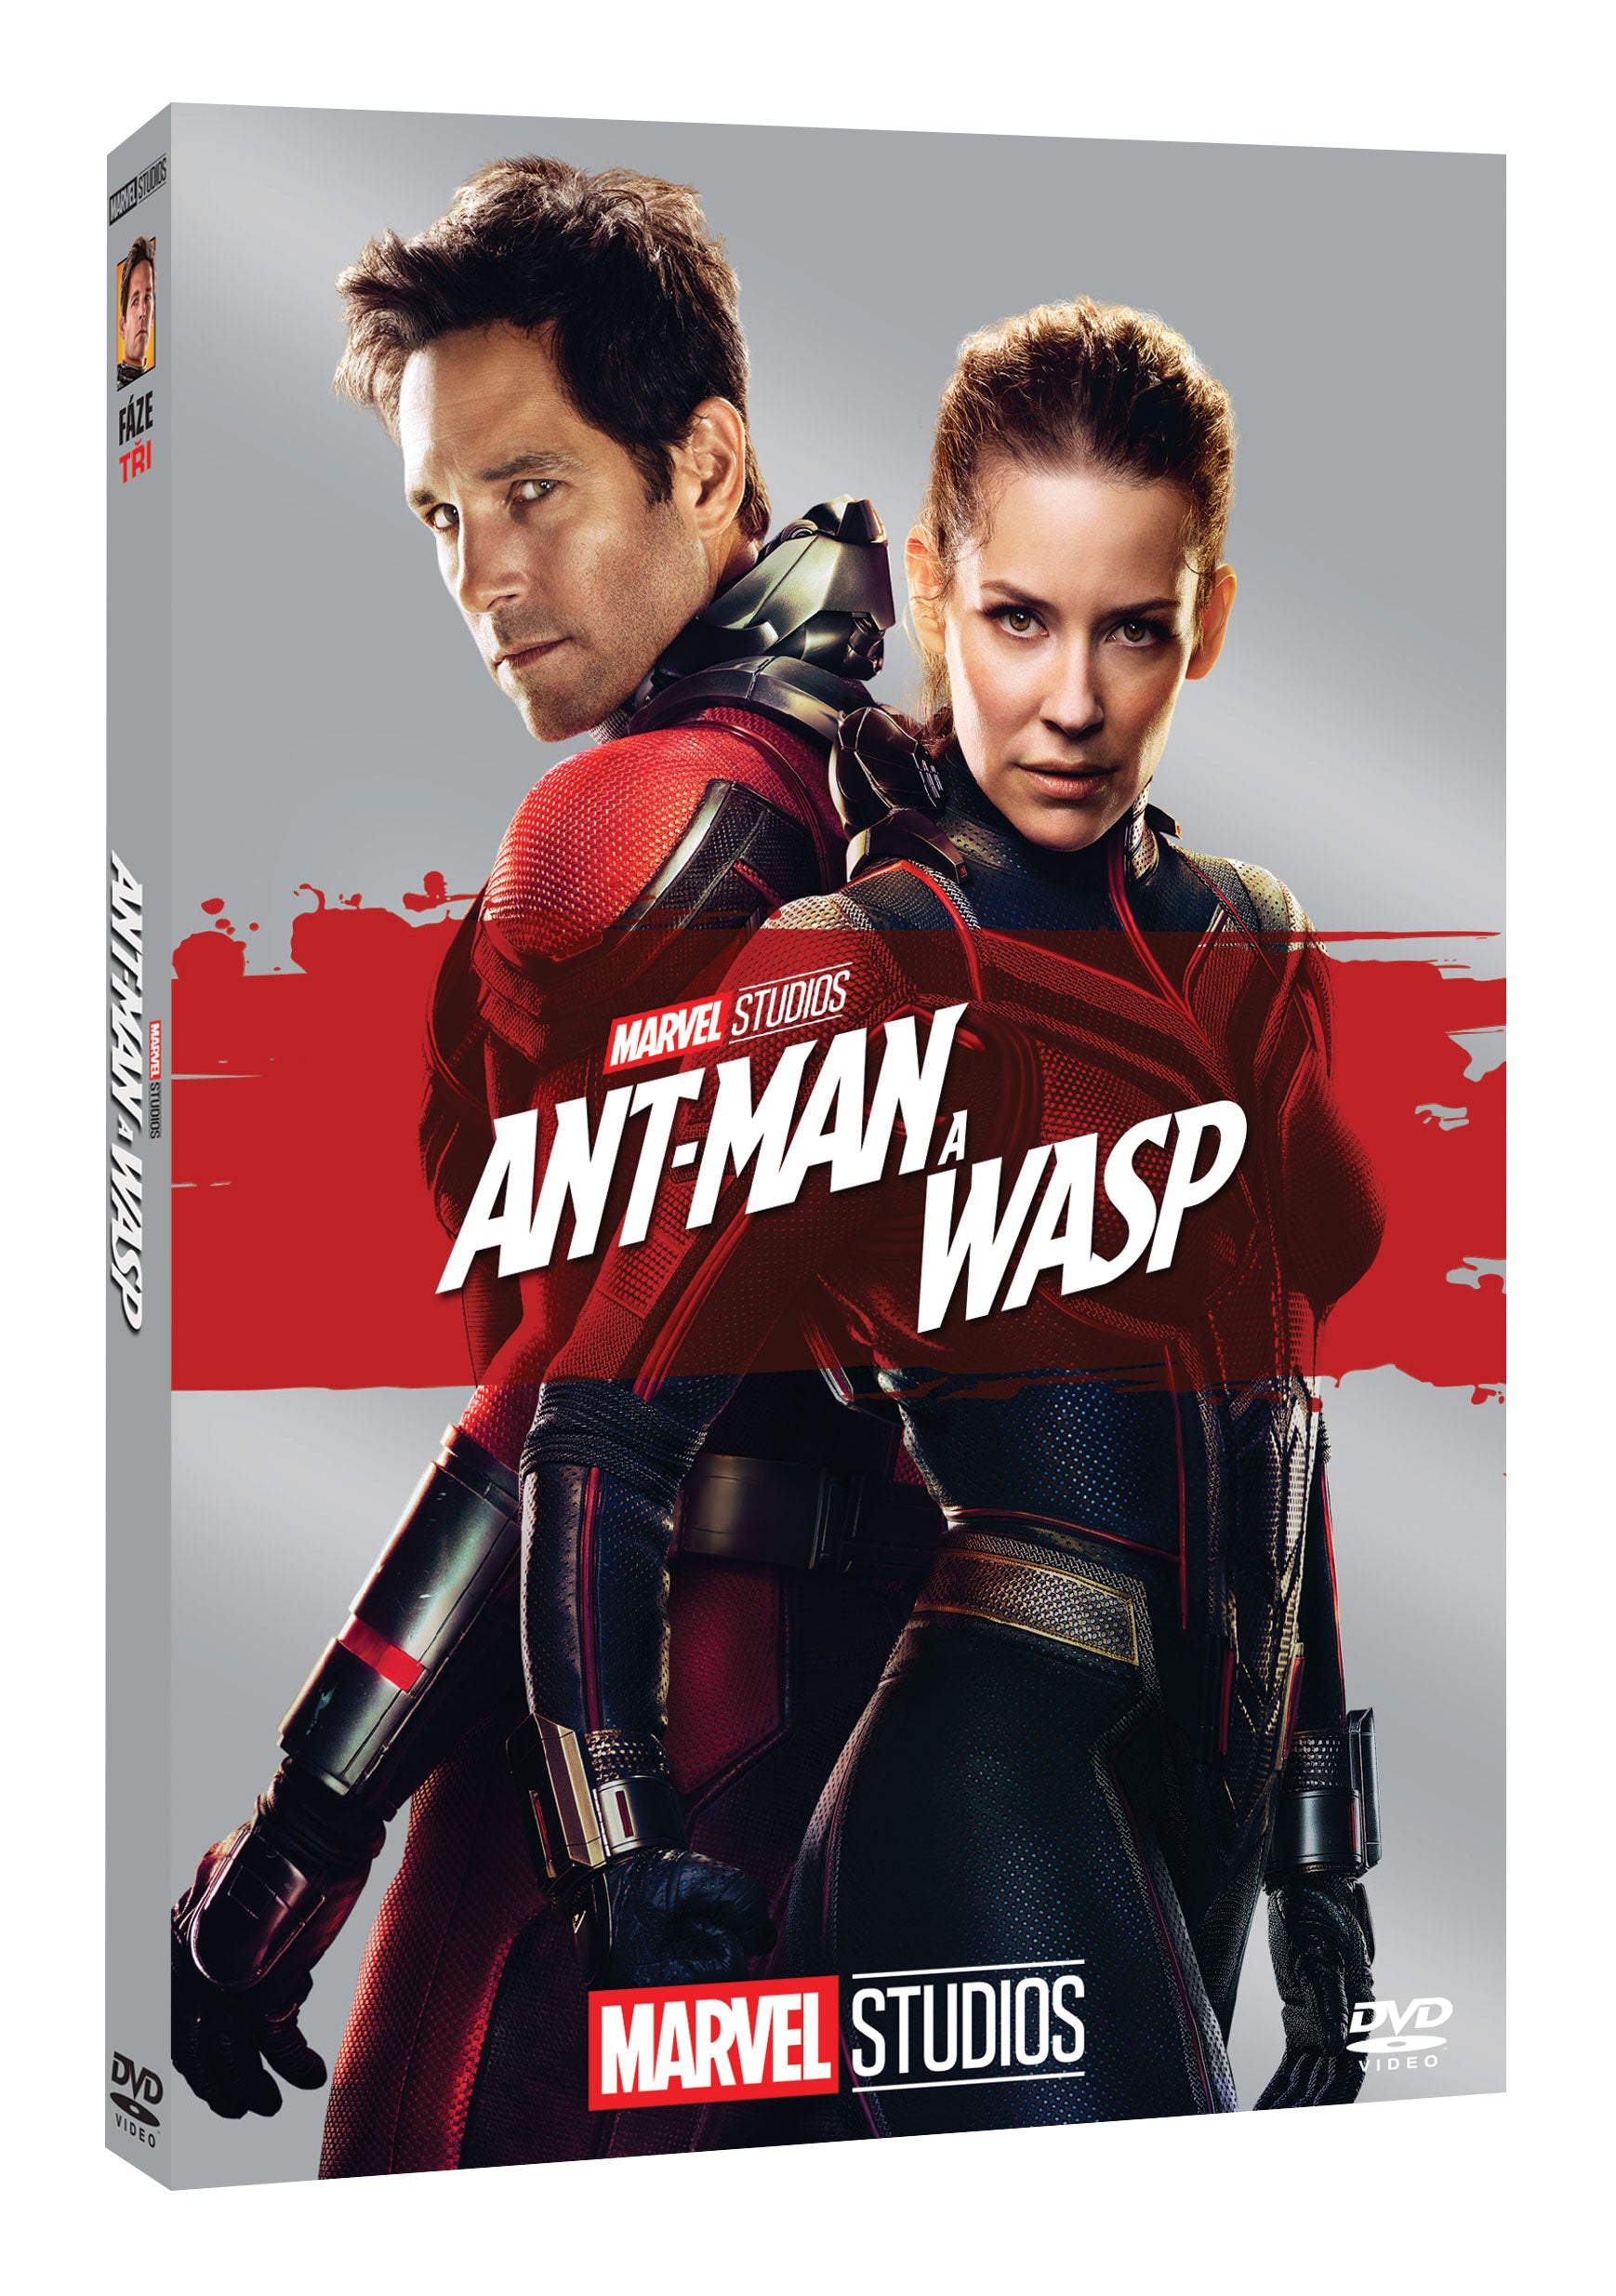 Ant-Man a Wasp DVD - Edice Marvel 10 let / Ant-Man and the Wasp